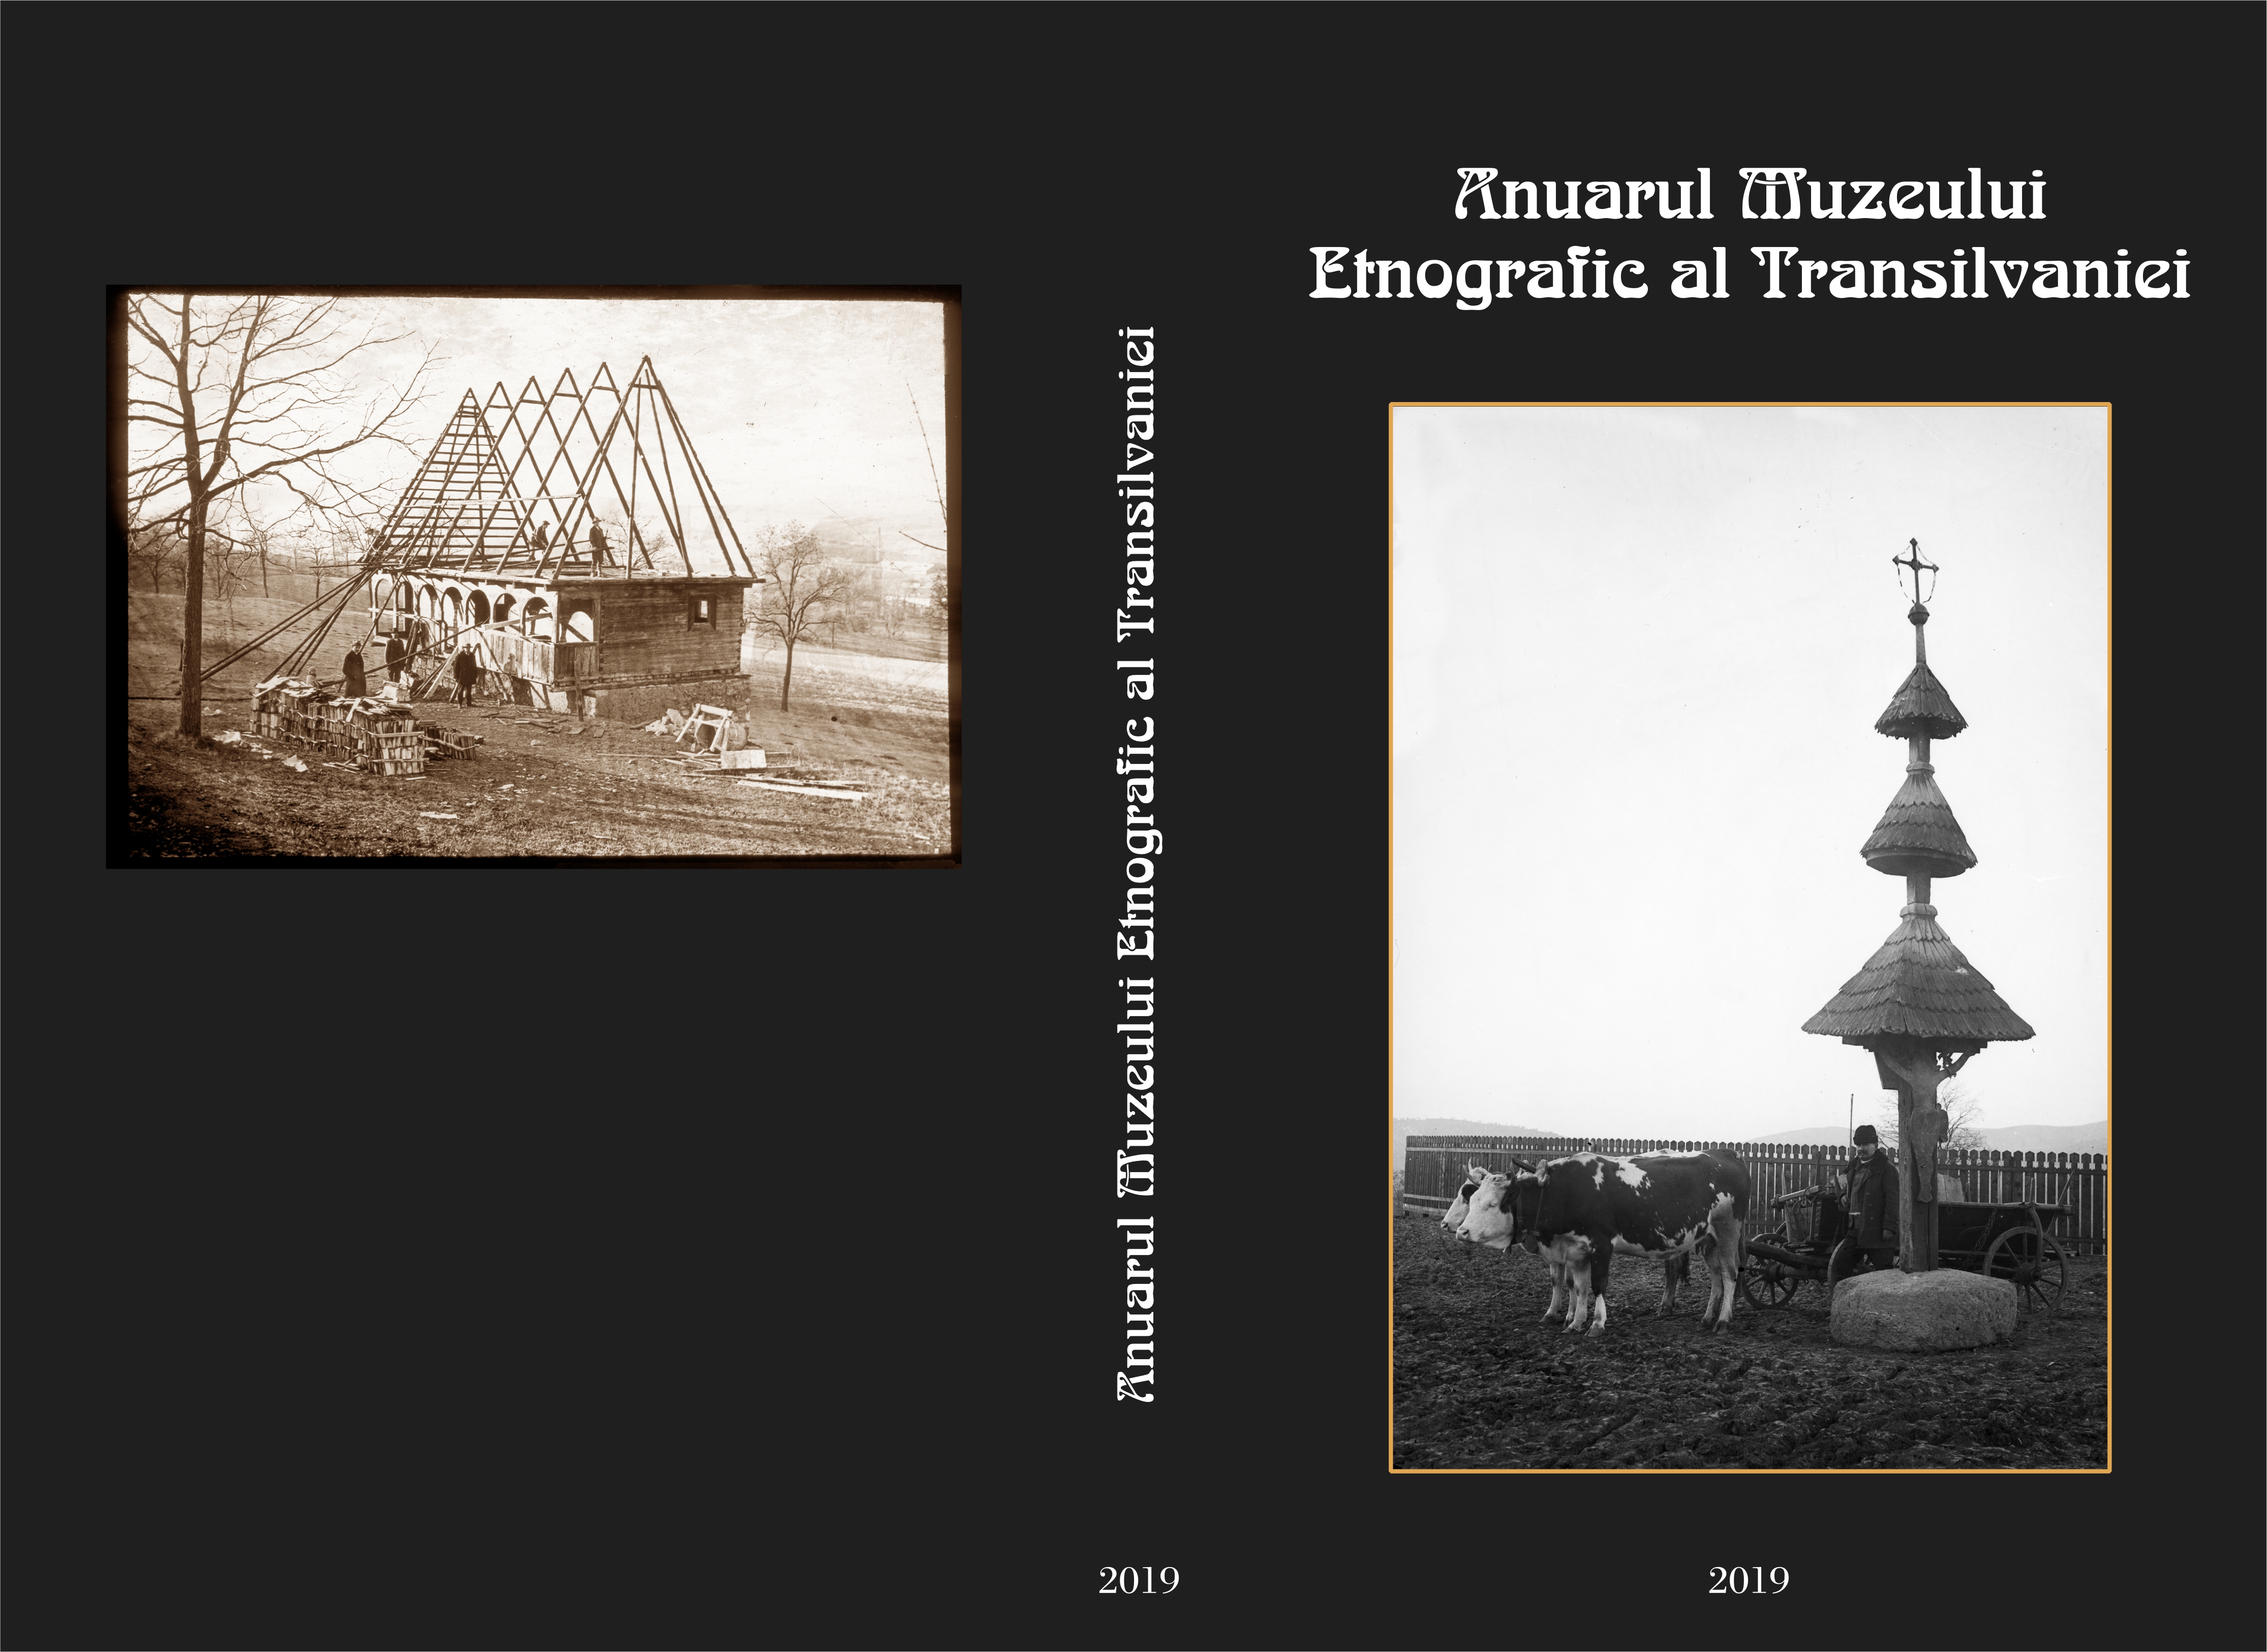 Memorates of some customs in Mărișel village, Cluj County. Field notes Cover Image